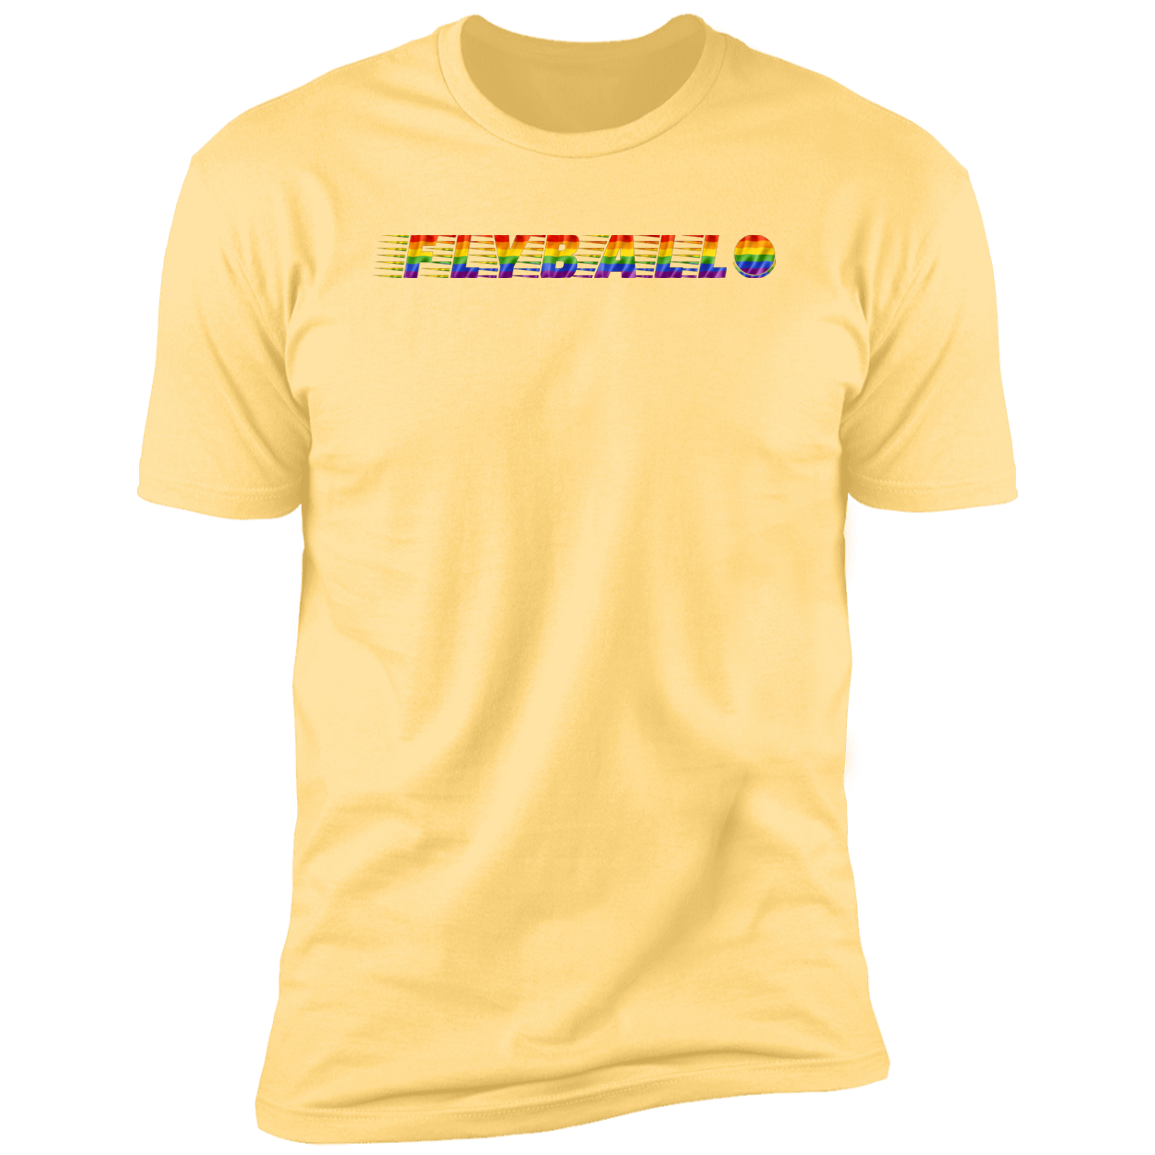 Flyball pride t-shirt, dog pride dog flyball shirt for humans, in banana cream